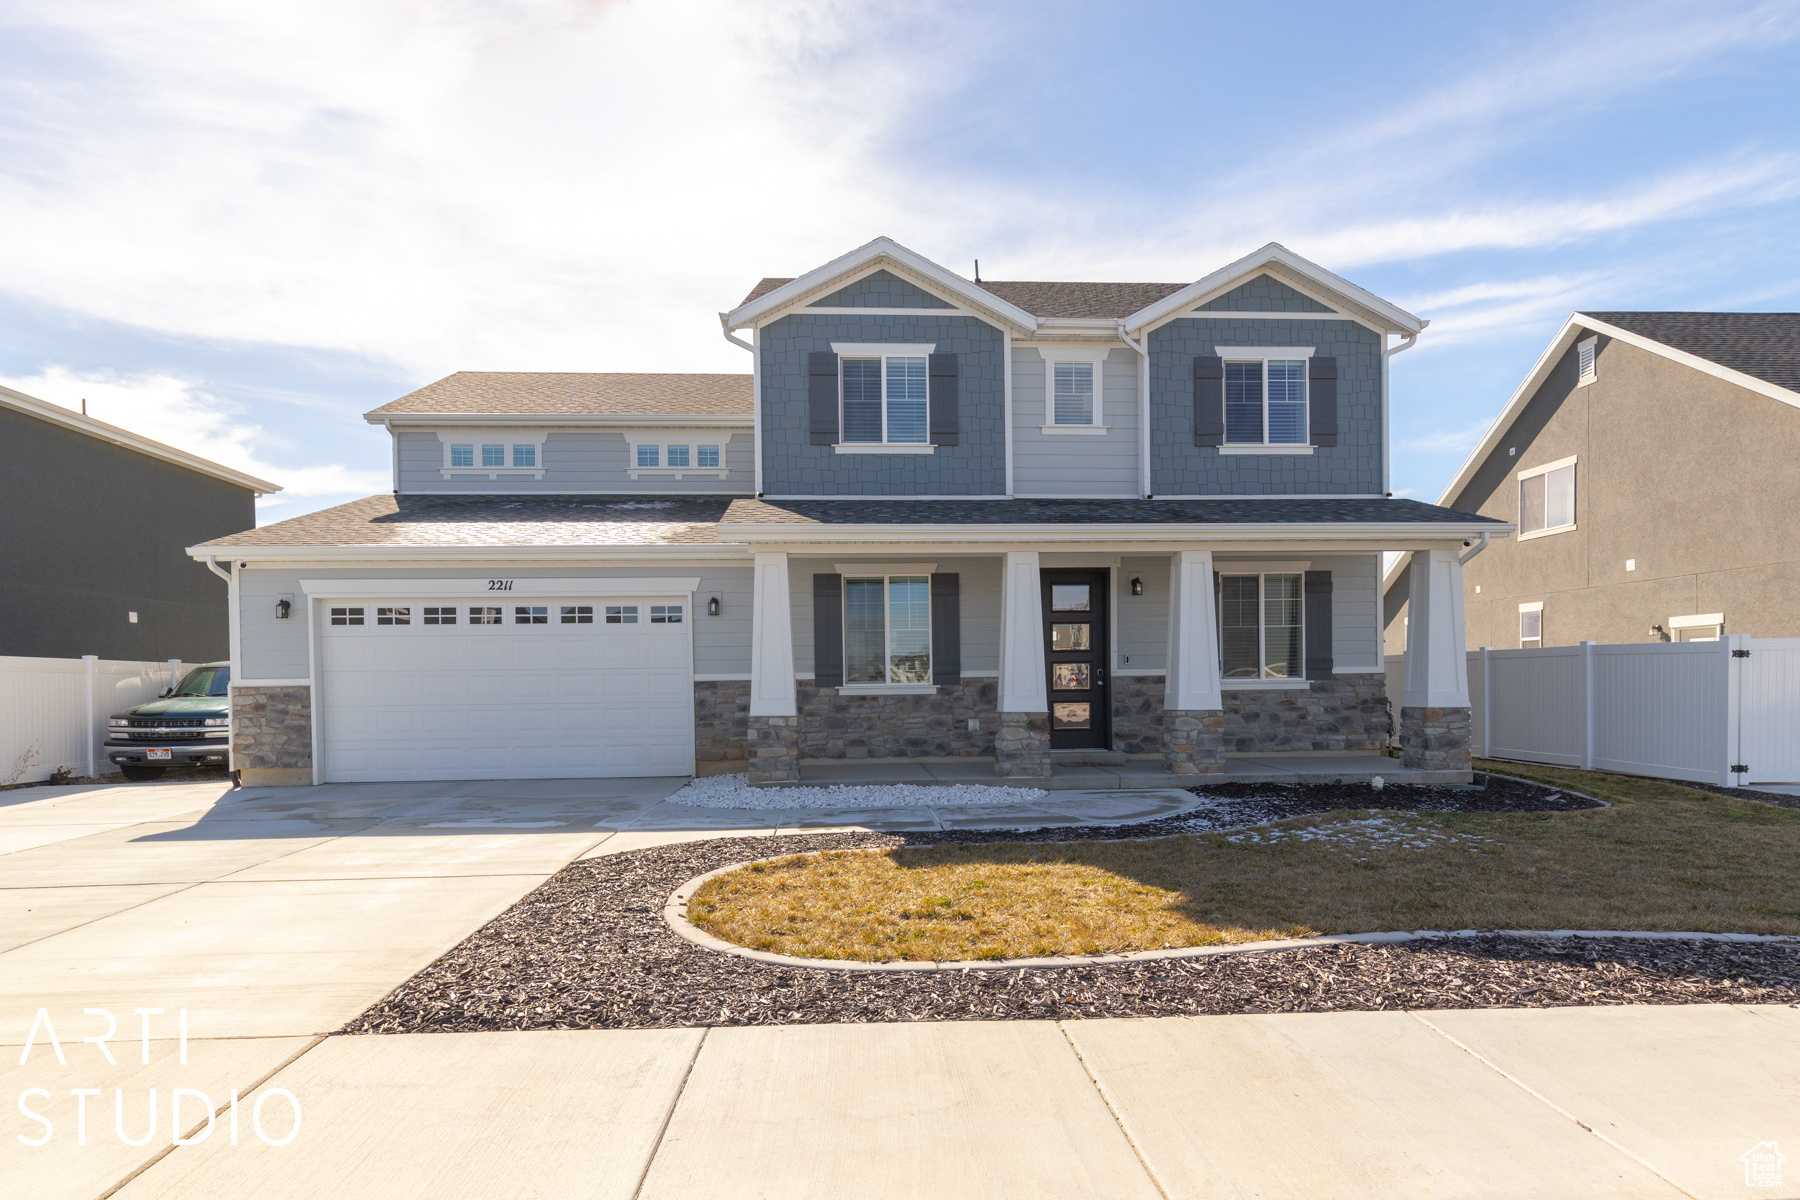 2211 W PARKVIEW, Syracuse, Utah 84075, 3 Bedrooms Bedrooms, 14 Rooms Rooms,1 BathroomBathrooms,Residential,For sale,PARKVIEW,1983962